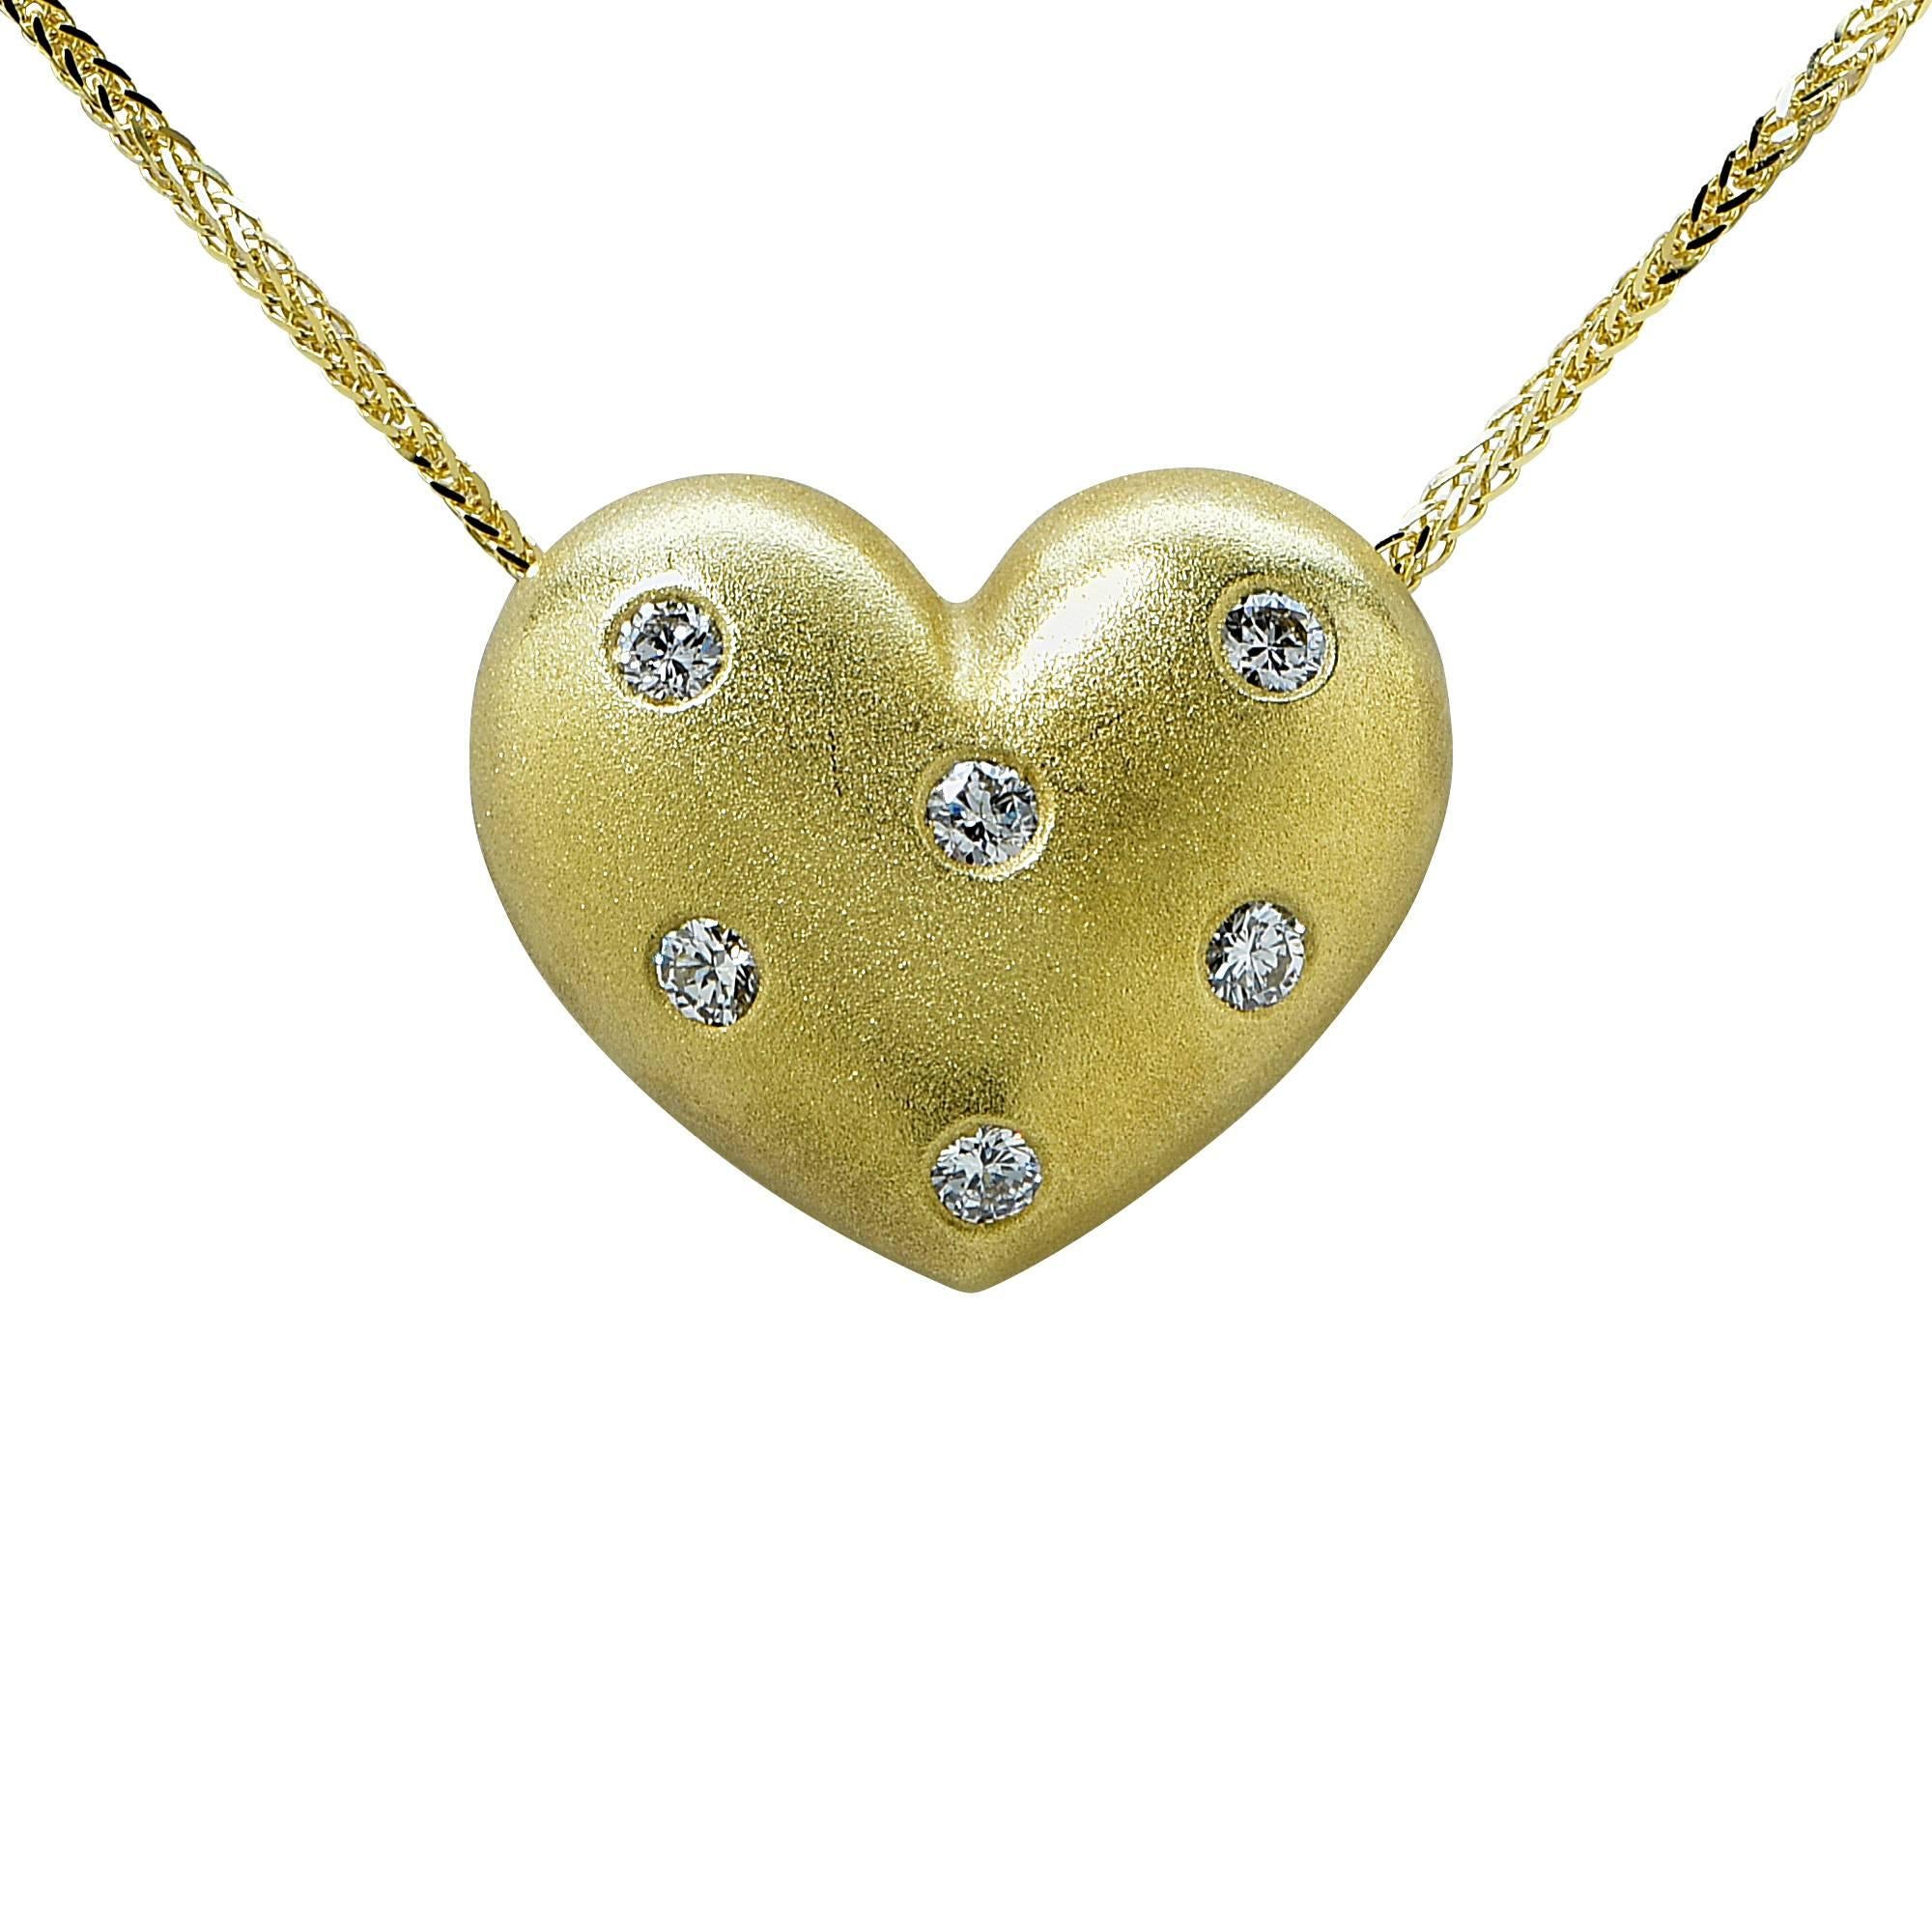 18k yellow gold heart pendant featuring 6 round brilliant cut diamonds weighing approximately .50cts total G color VS clarity on a 14k yellow gold chain.

The necklace is 16 inches in length and the pendent is .75 inch in height by .90 inch in